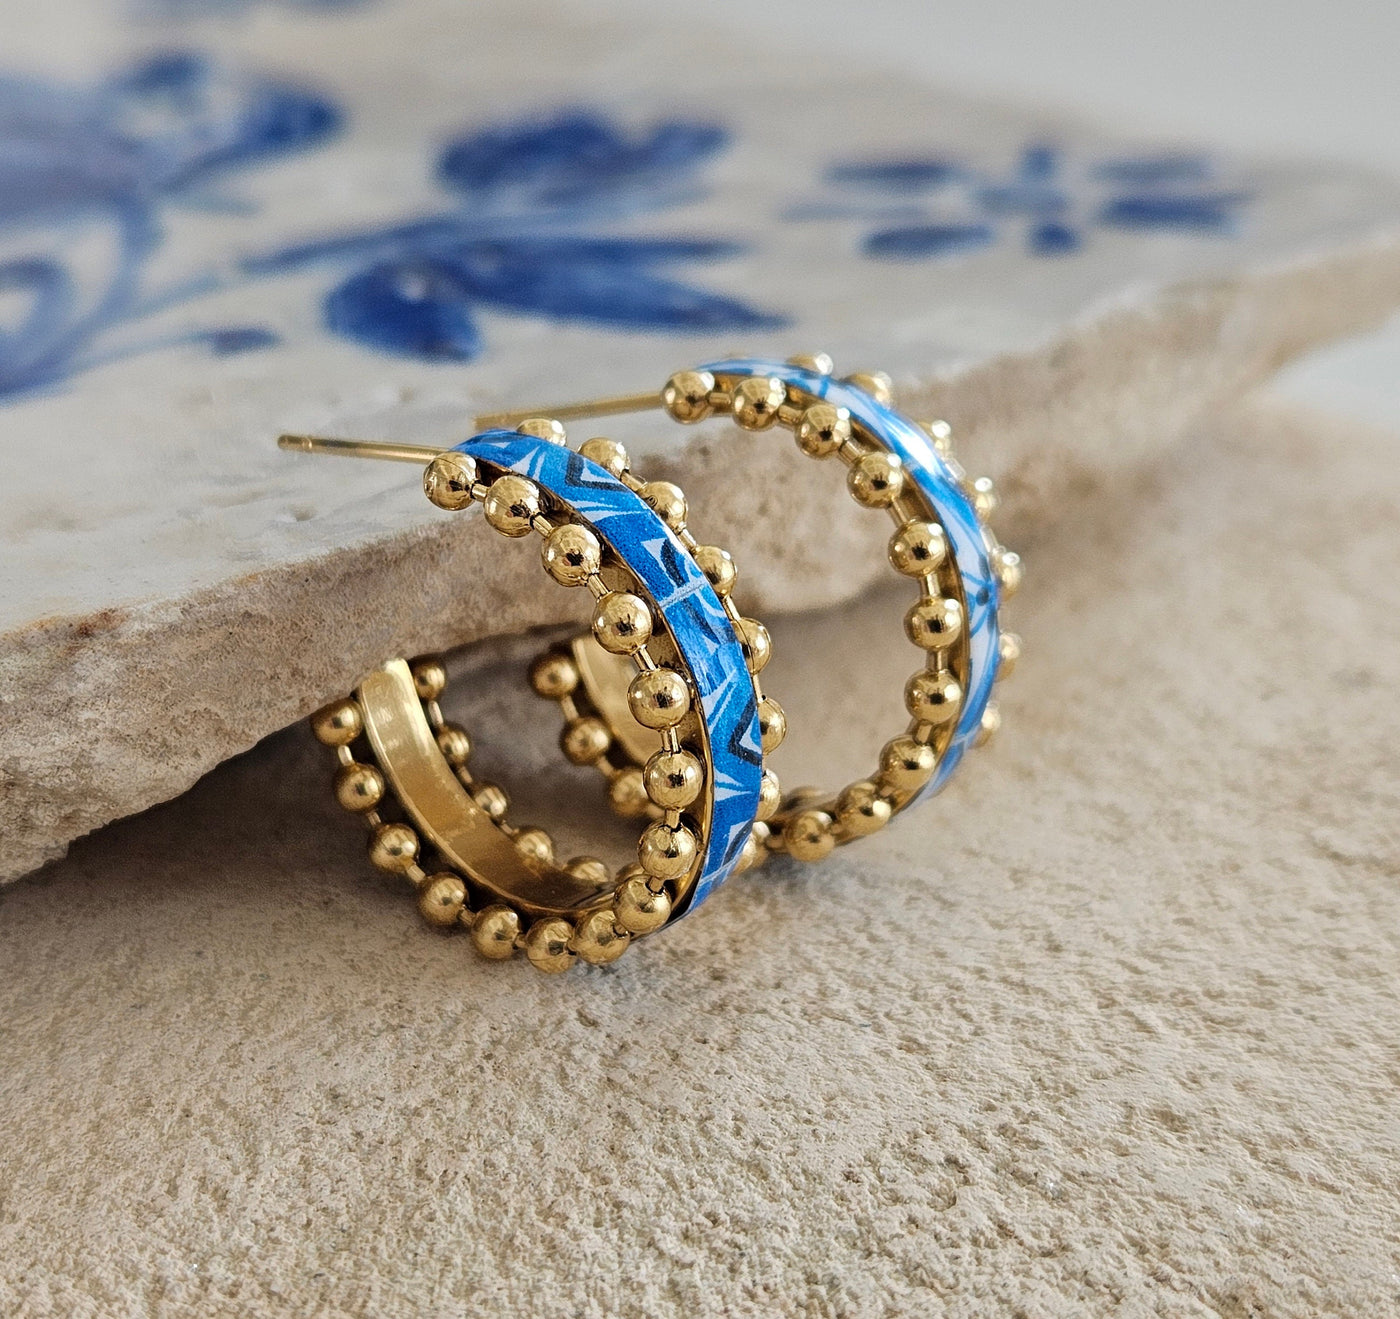 Small Gold HOOP Tile Earring Portugal STEEL Blue Lisbon Azulejo Delicate Tiny Gold Ball Hoops Historical Jewelry Gift Portugal Tile Souvenir